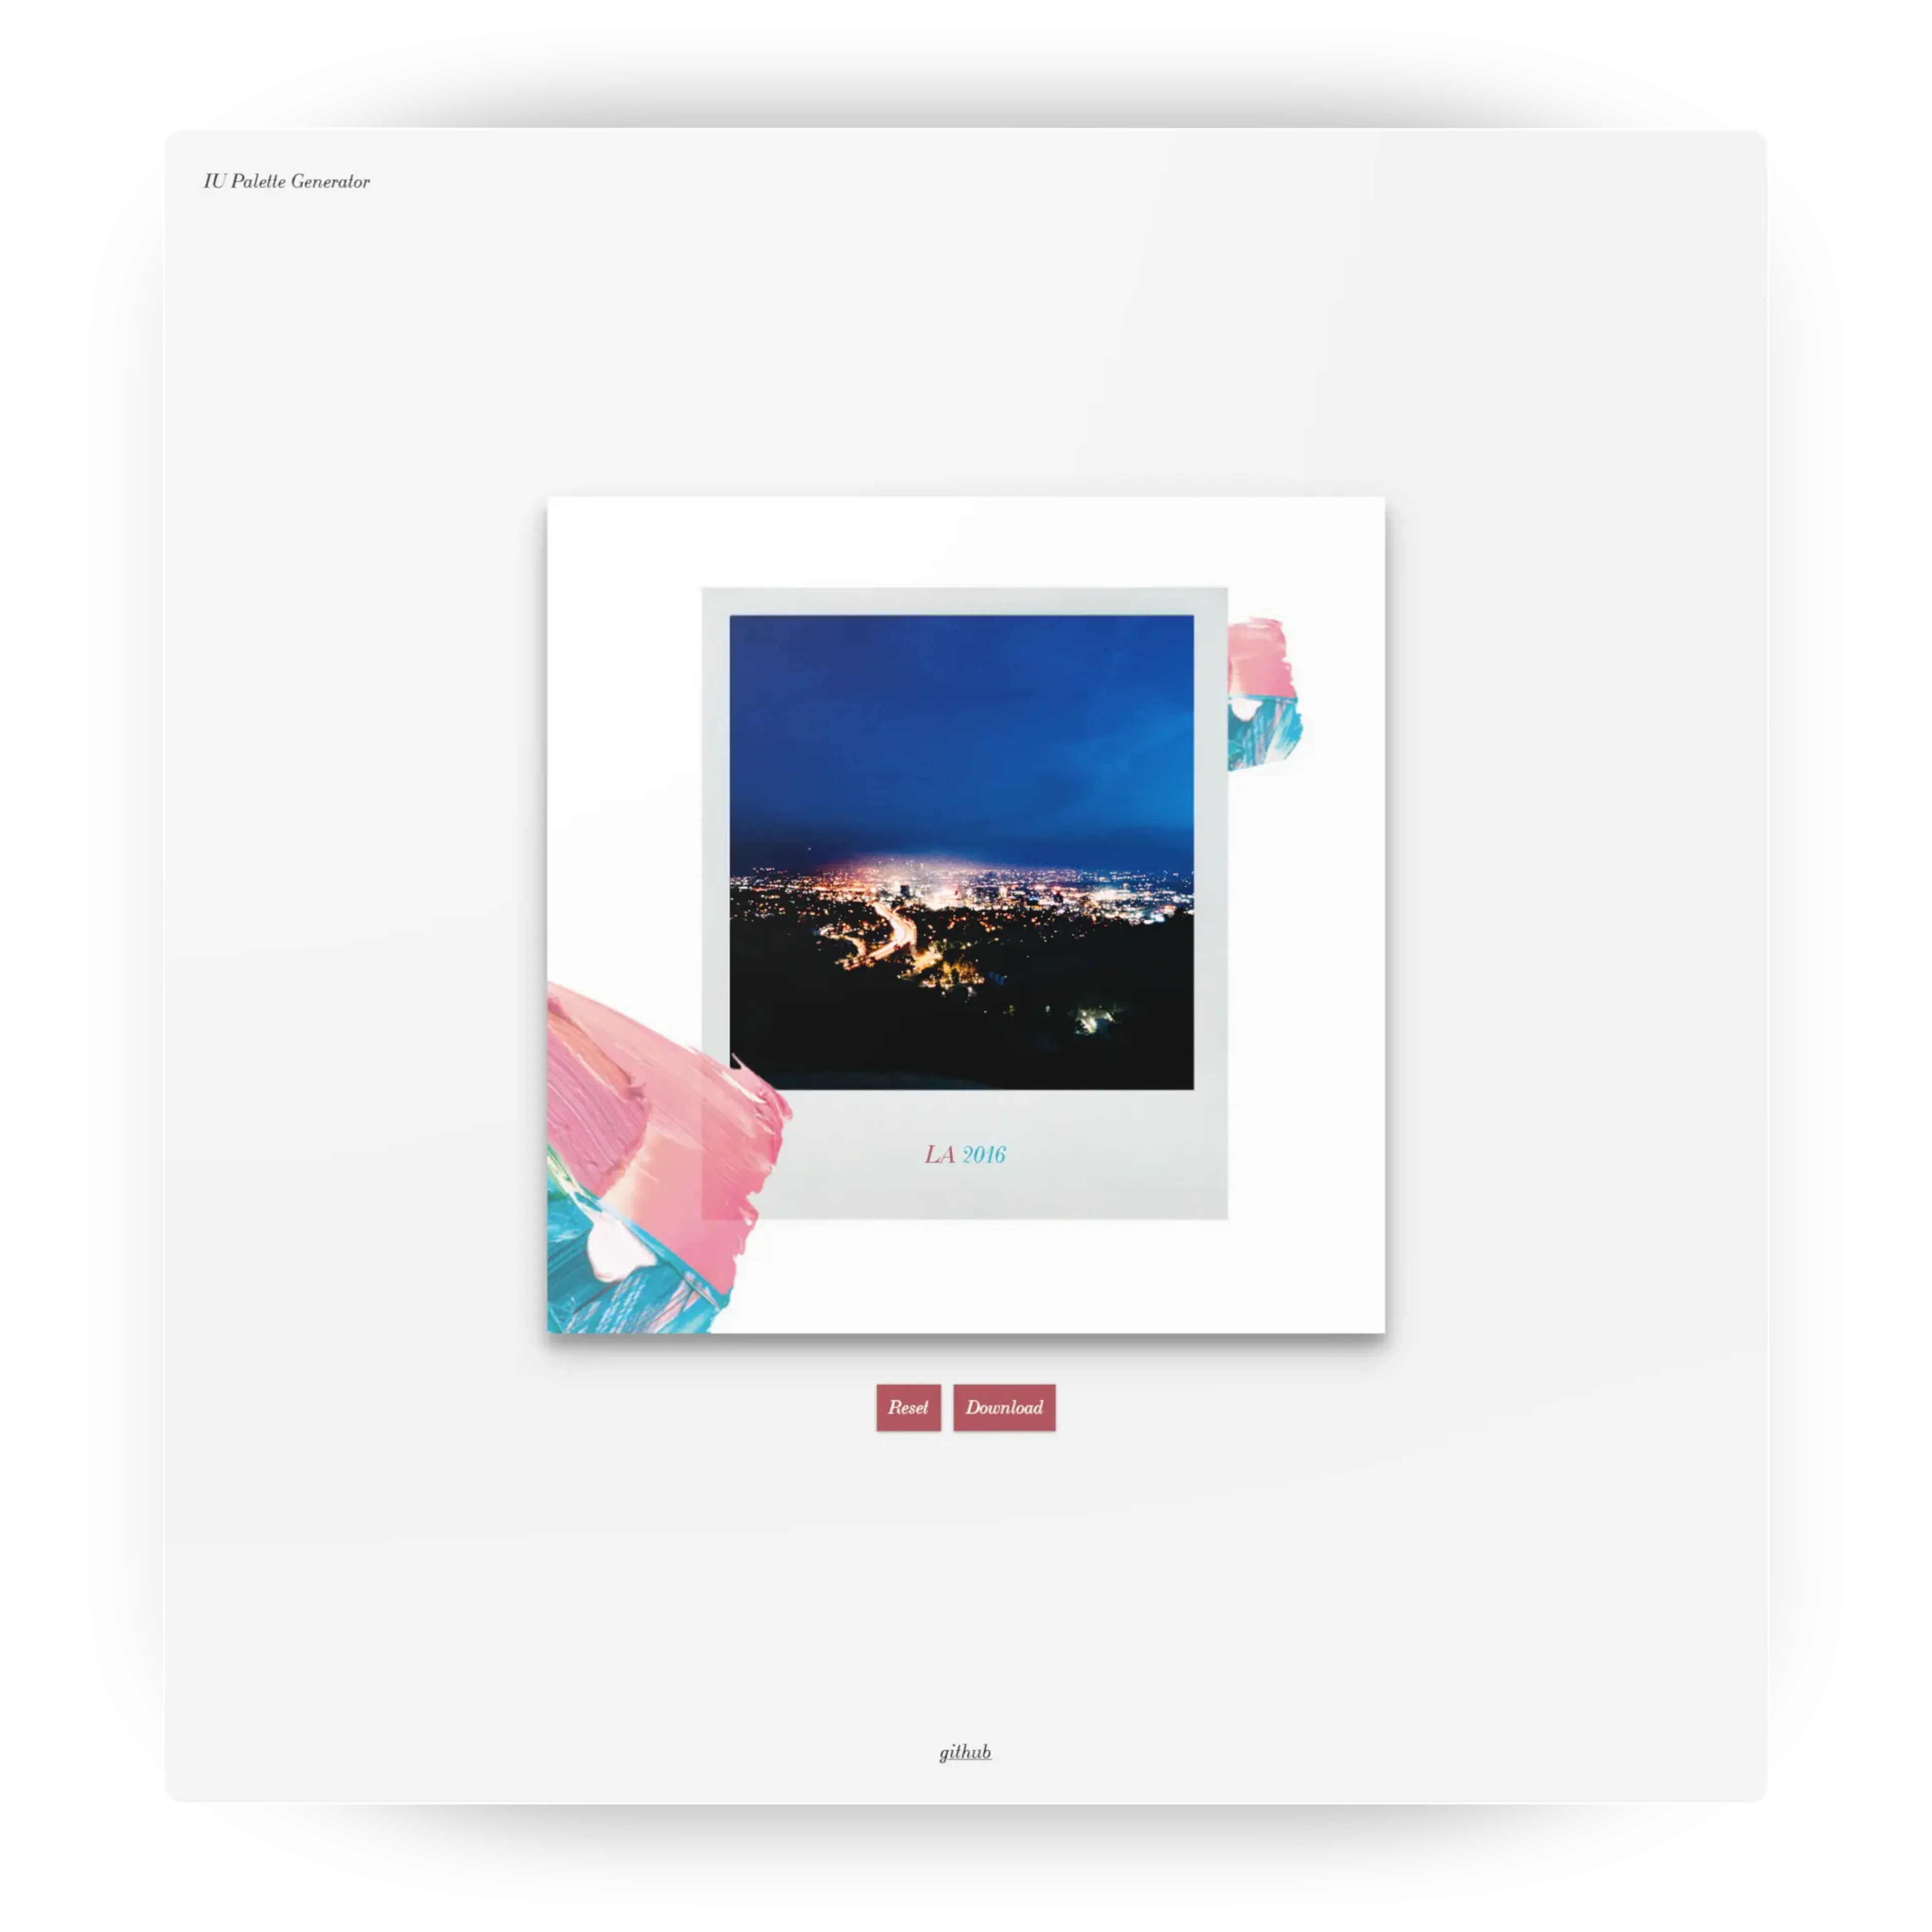 Screenshot of the 'Palette' app. In the center of the screen, there is a Polaroid-style photo featuring a nighttime view of Los Angeles. The Polaroid-style photo is labeled in a serif font: 'LA 2016' with 'LA' in pink and '2016' in cyan. Surrounding the photo are abstract strokes of pink and blue paint on the border of the frame. Below the image are interface buttons 'Reset' and 'Download.' In the top left corner is the app's title, 'IU Palette Generator,' and at the bottom is a GitHub link for the app's source code.